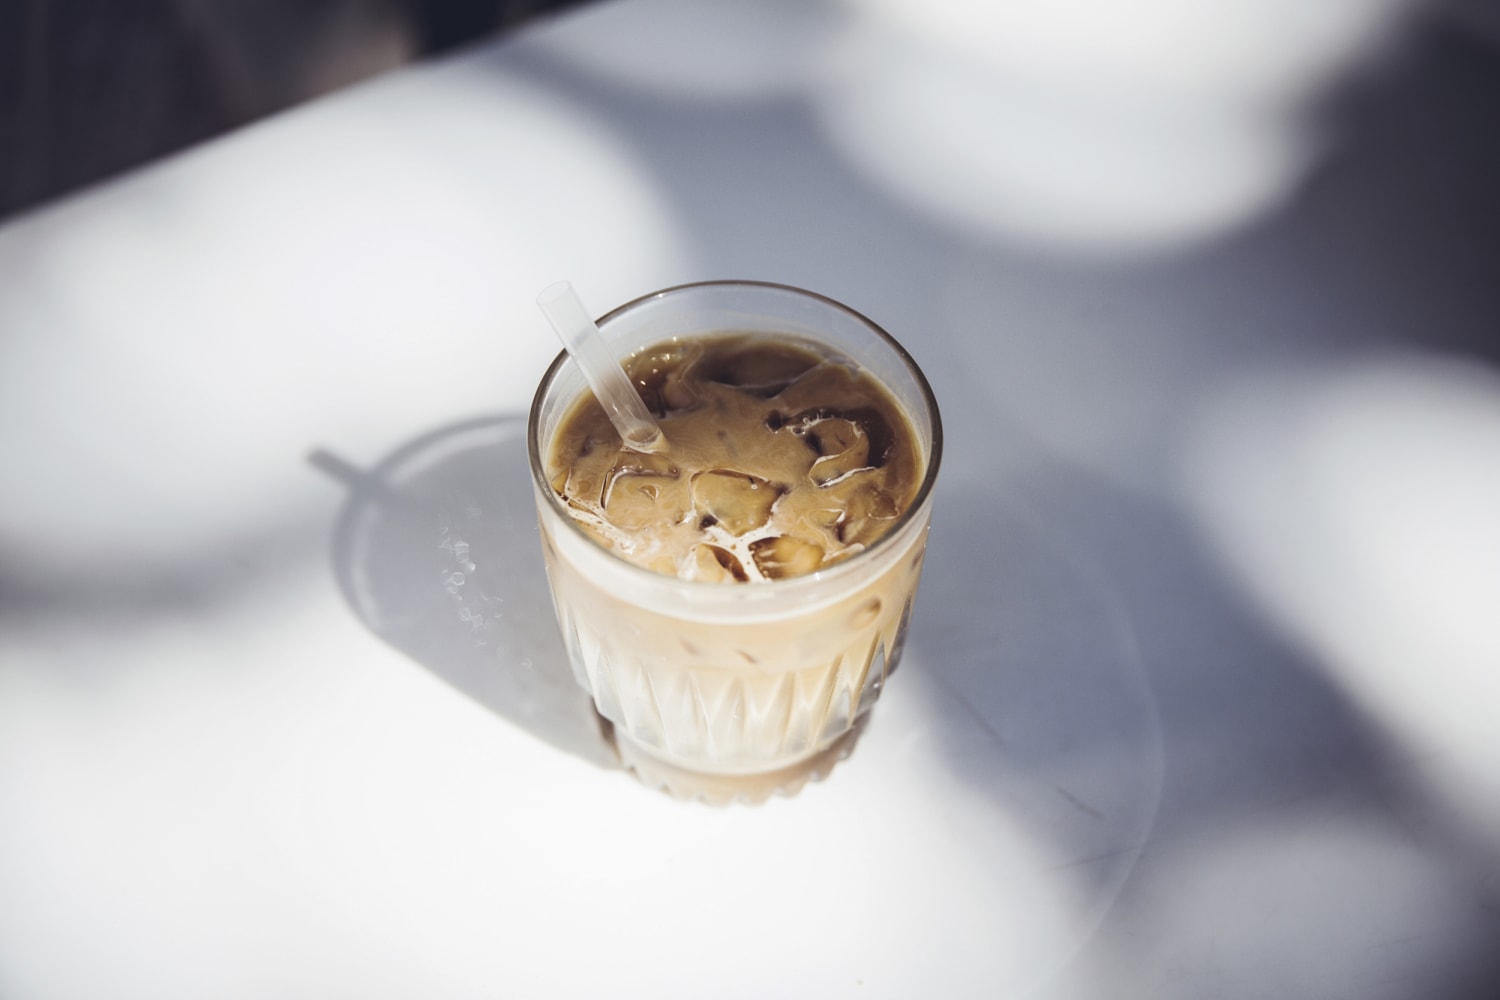 Iced coffee drinkers can get a cheaper dose of caffeine at home this summer.